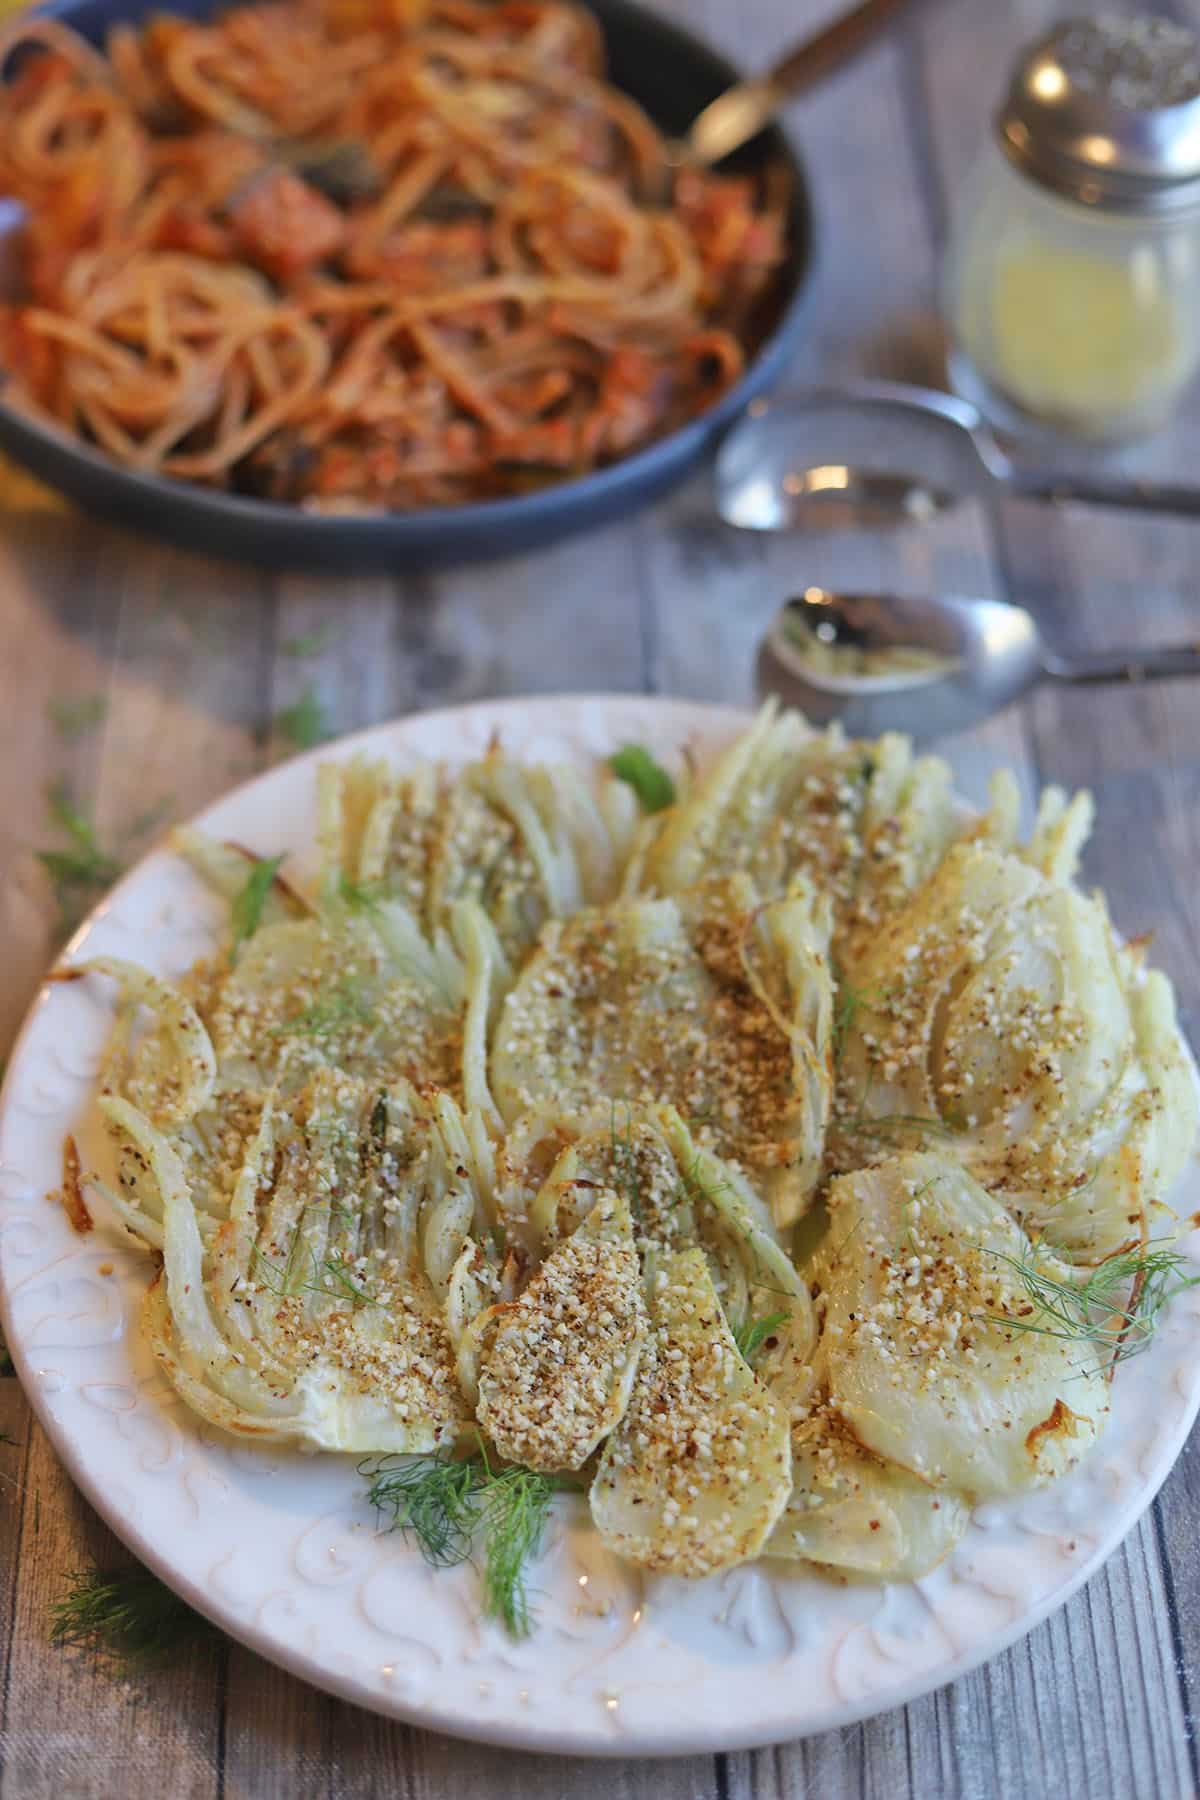 Plate with slices of roasted fennel in front of pasta bowl and tongs.